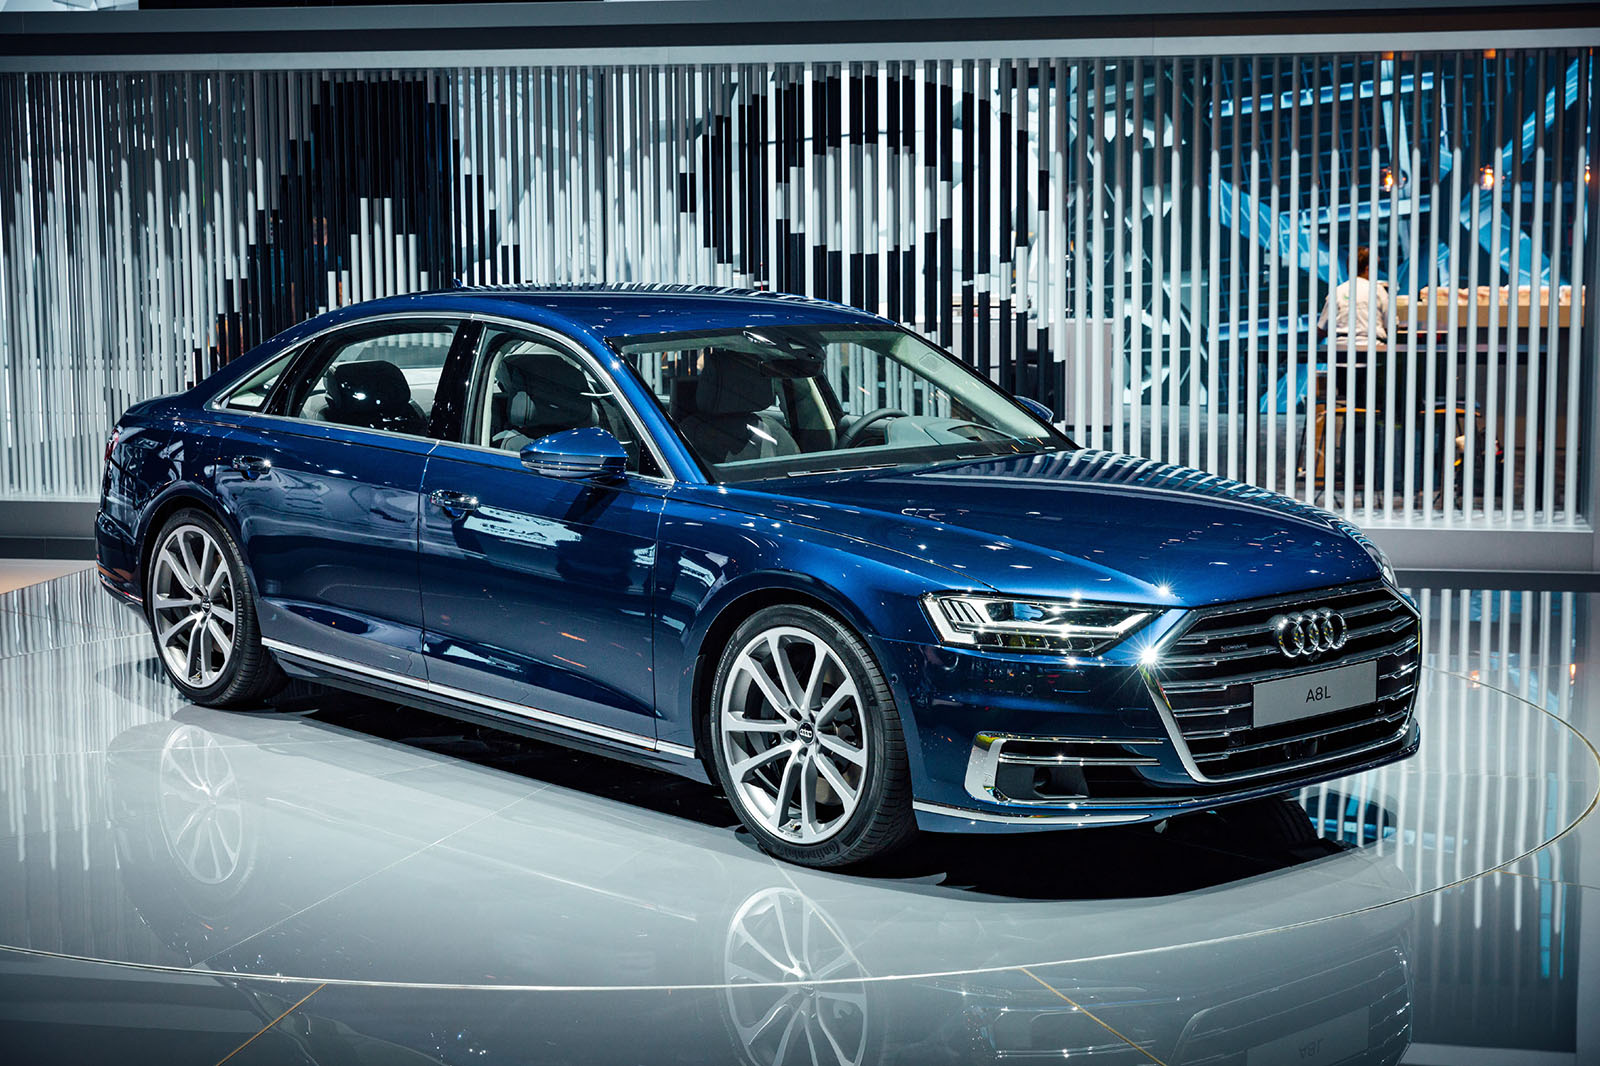 2017-audi-a8-revealed-as-brand-s-most-high-tech-model-yet-autocar